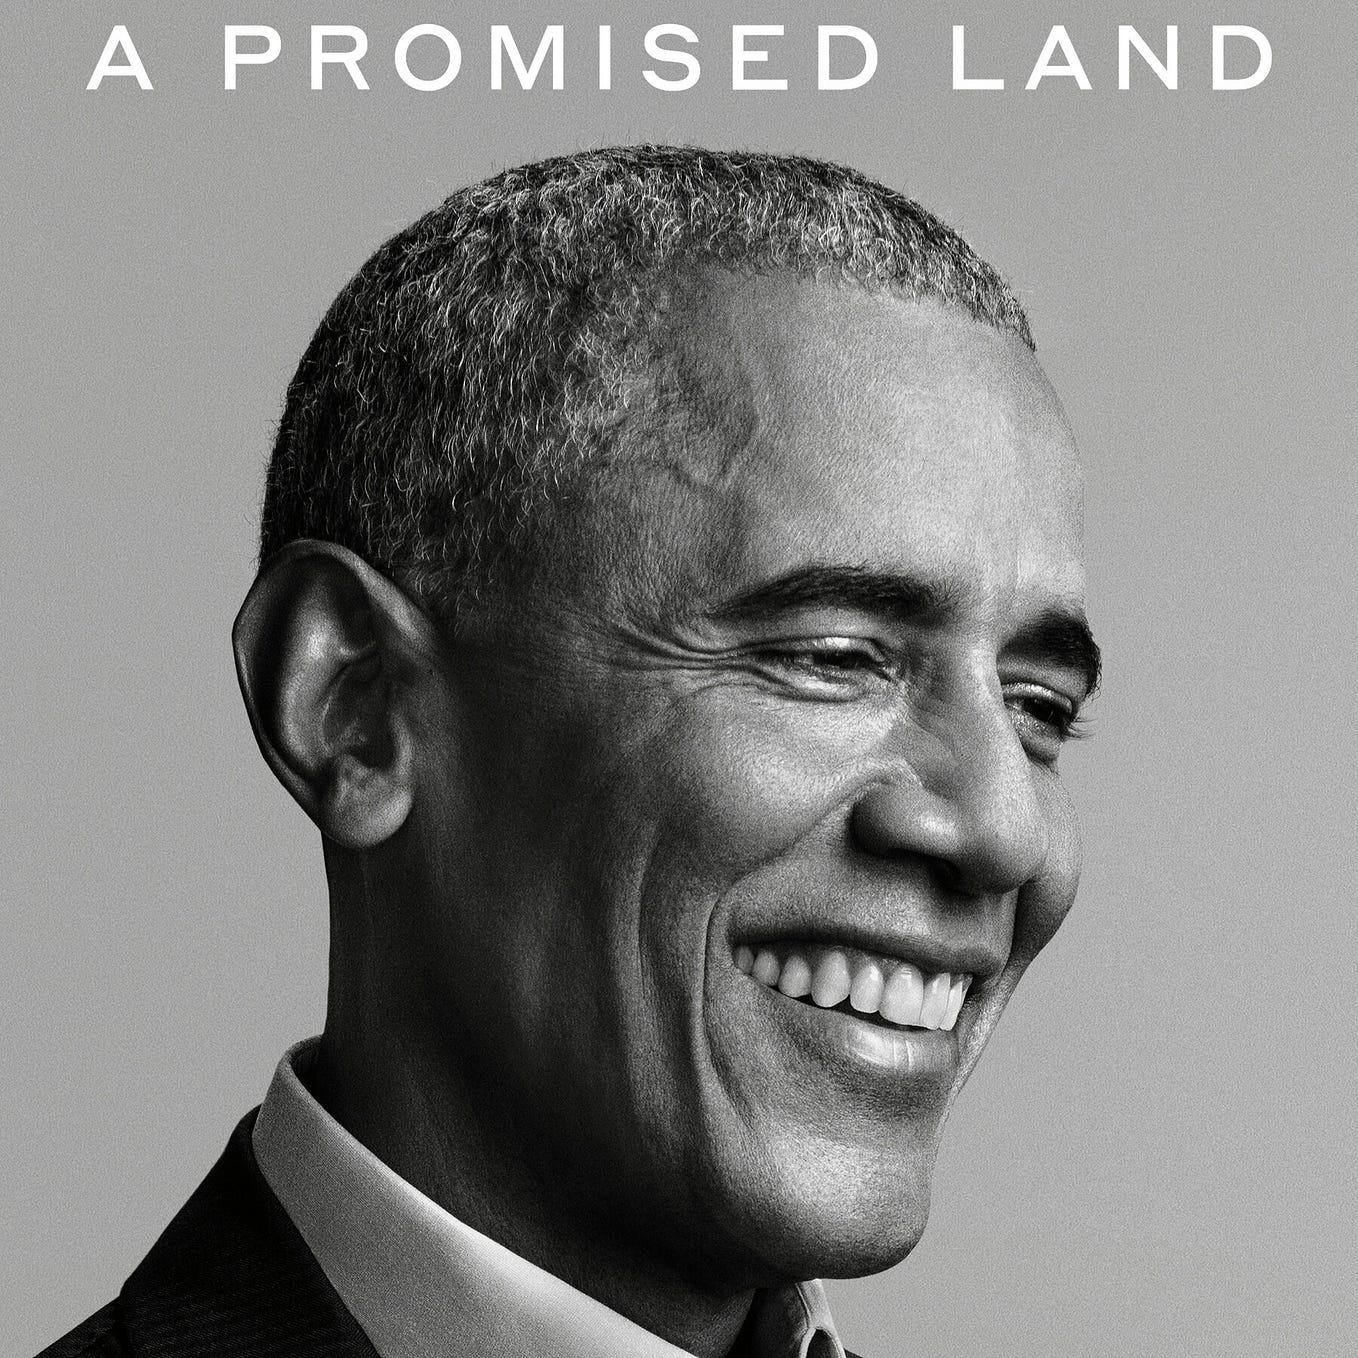 My thoughts on Obama recent release ‘a promised land’